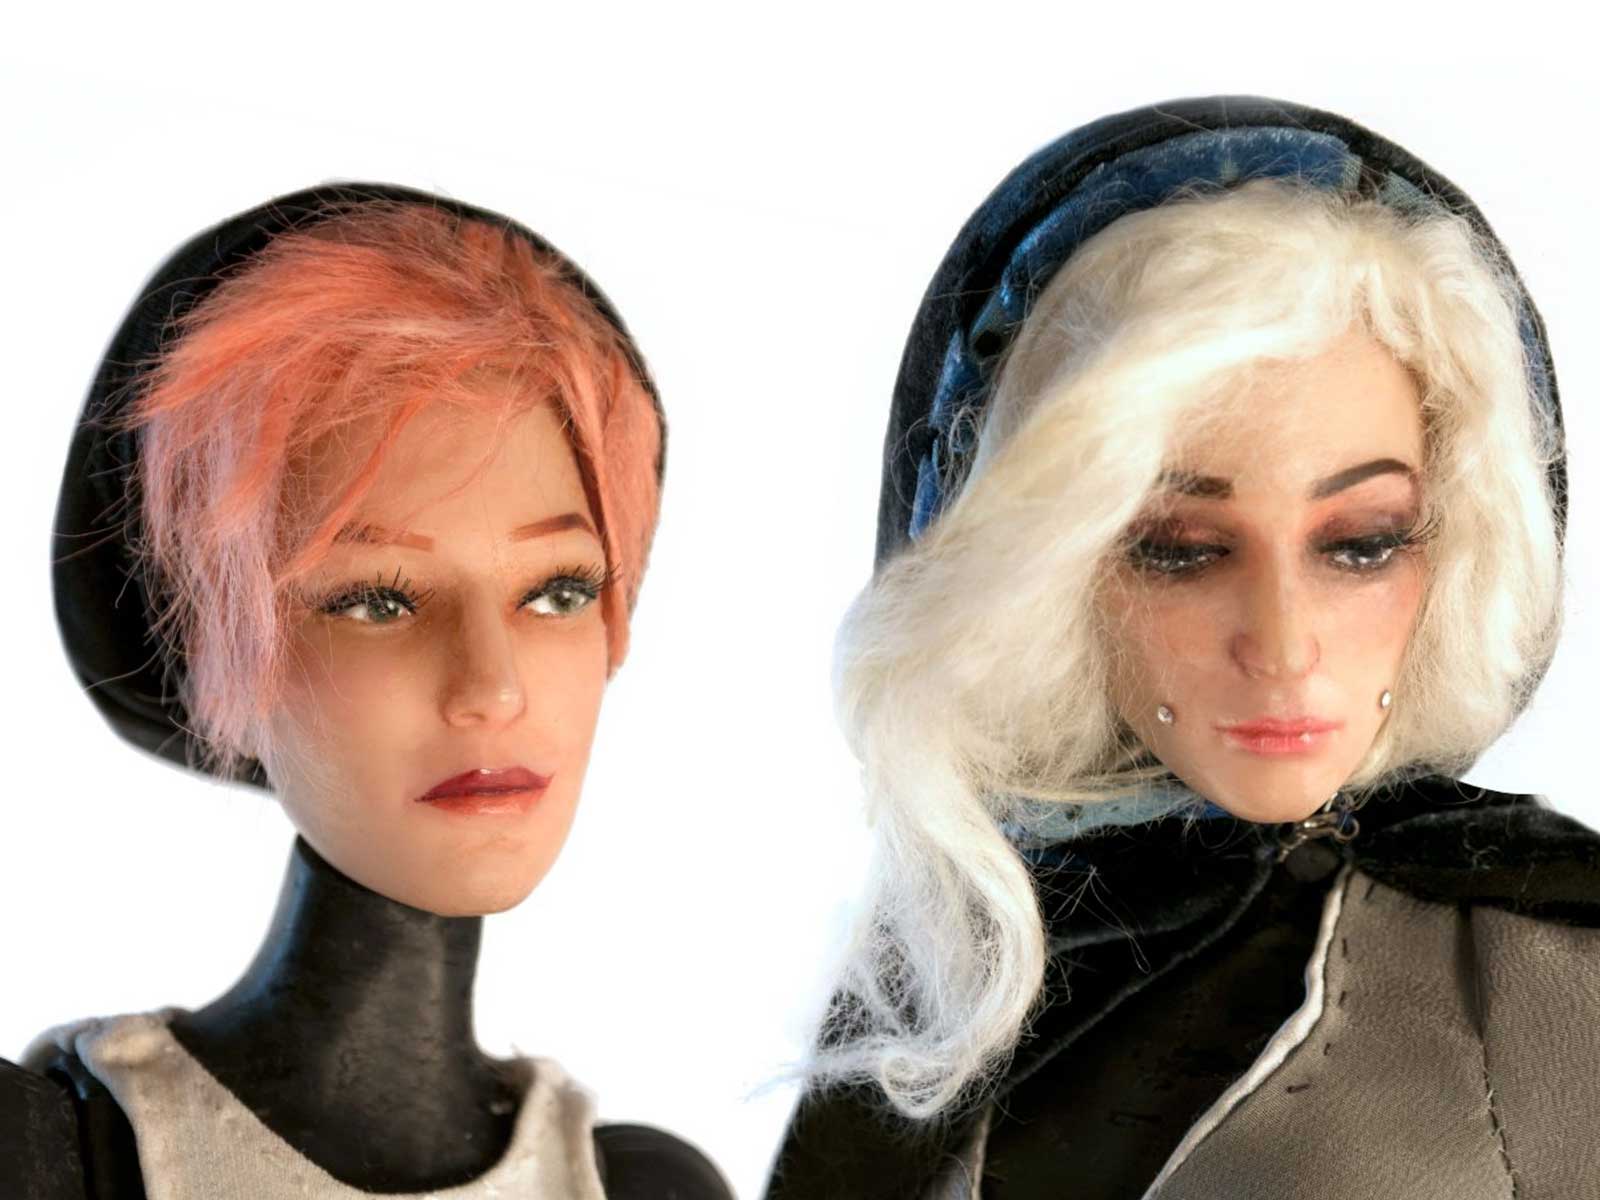 A head shot of two dolls side-by-side, one with short red hair and one with long white hair.